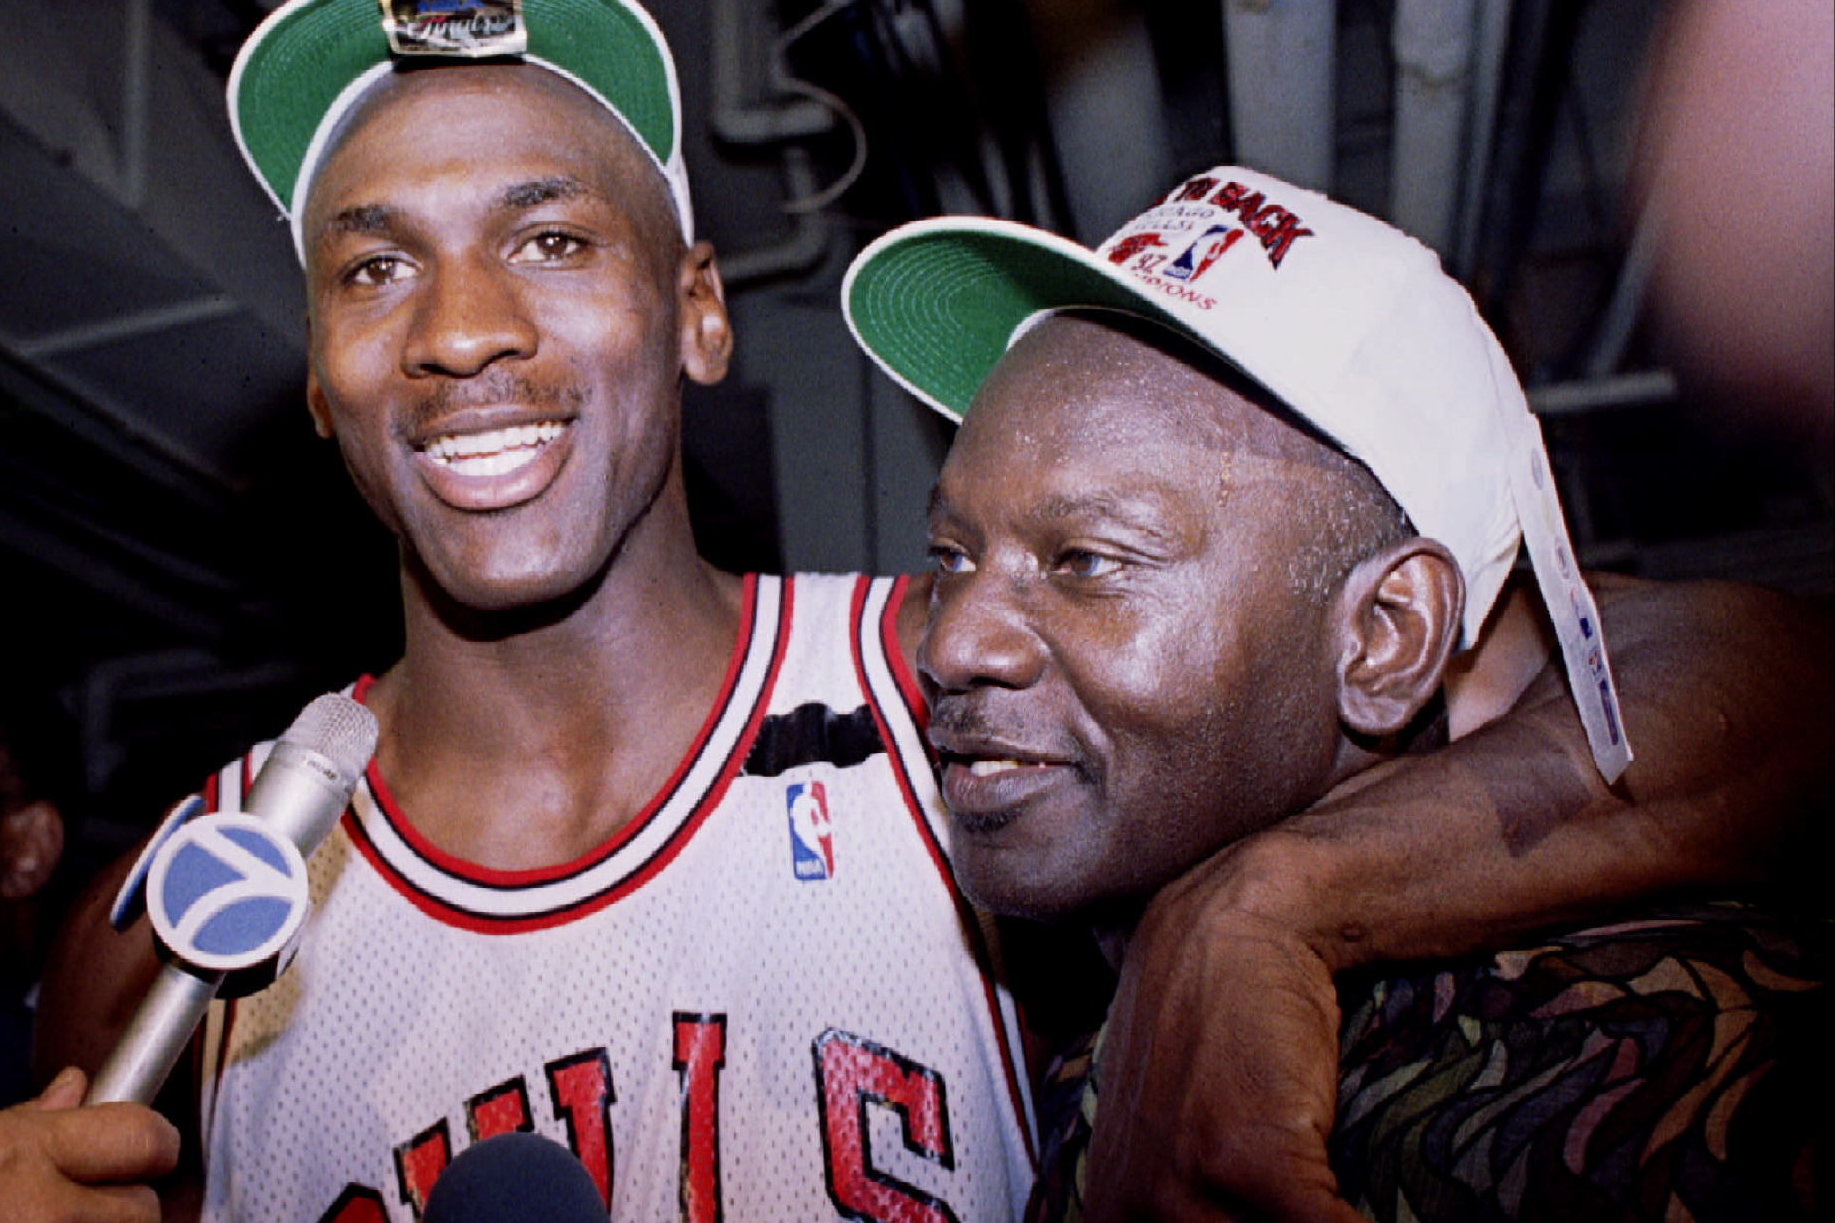 'My father left us, we have nowhere to go': The 'Godfather' of legendary Michael Jordan's $ 5.1 billion brand had to pick up trash to start his career conquering journey my great basketball